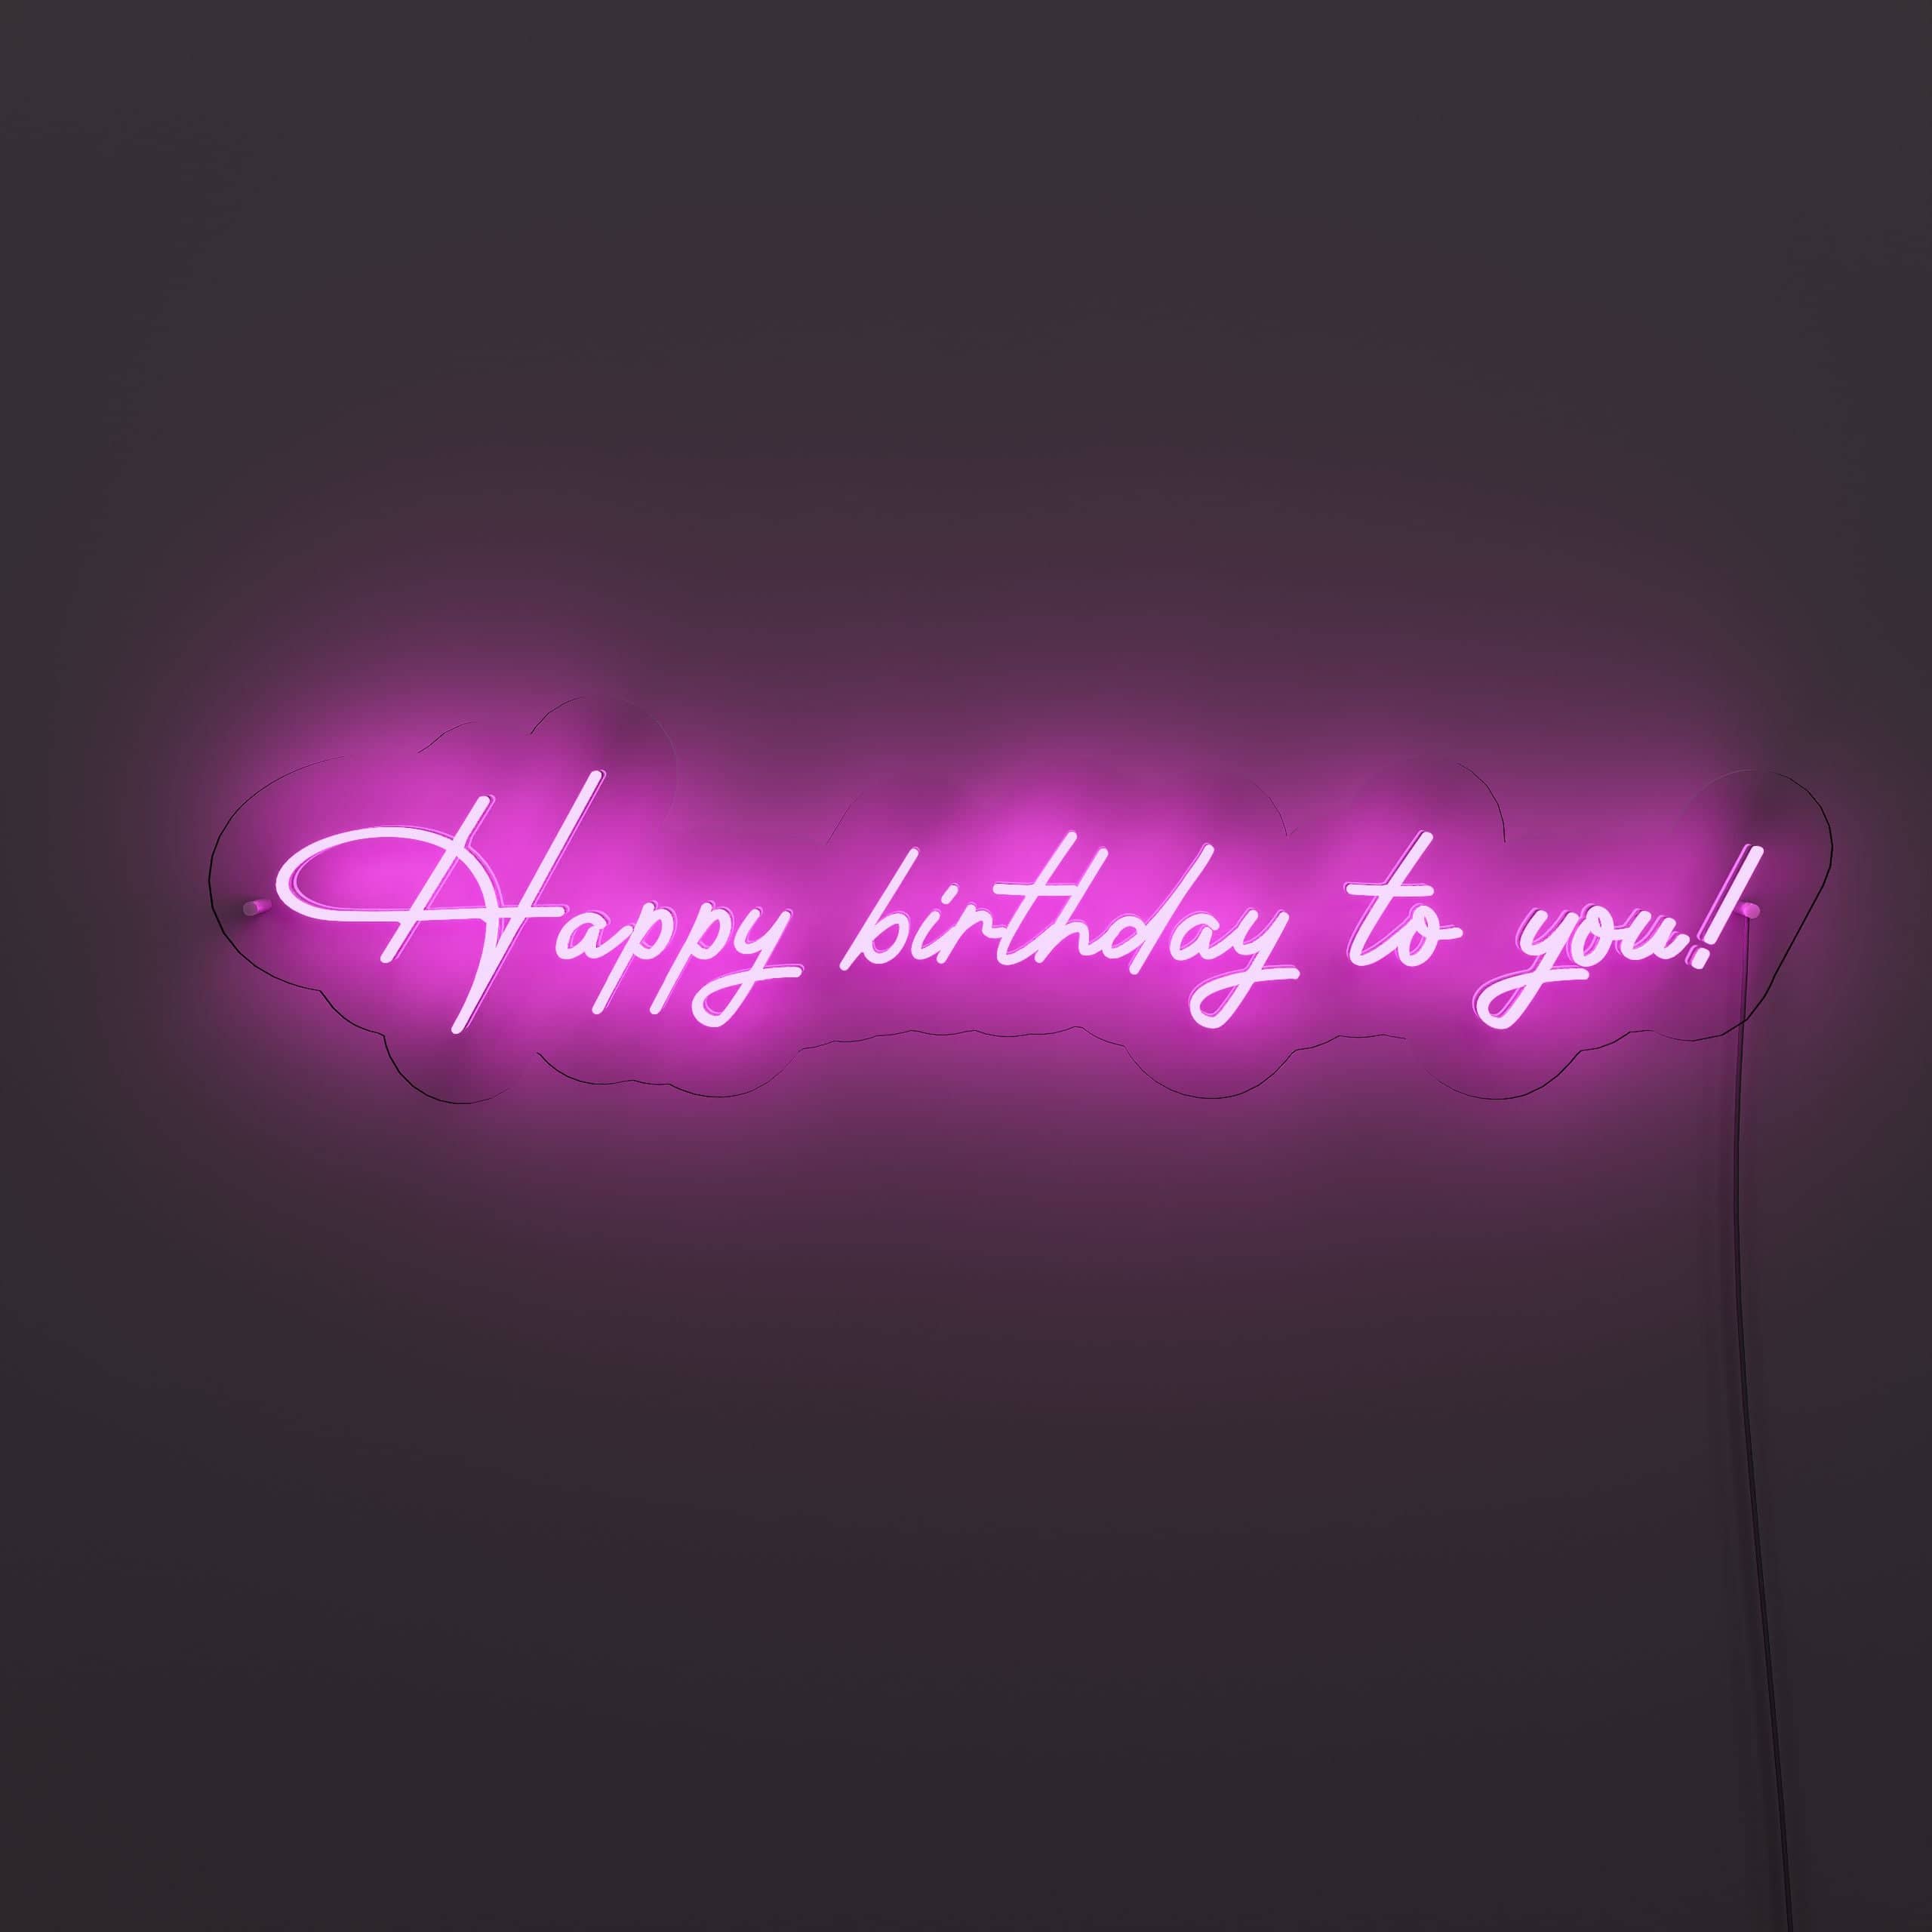 may-all-your-birthday-dreams-come-true!-neon-sign-lite